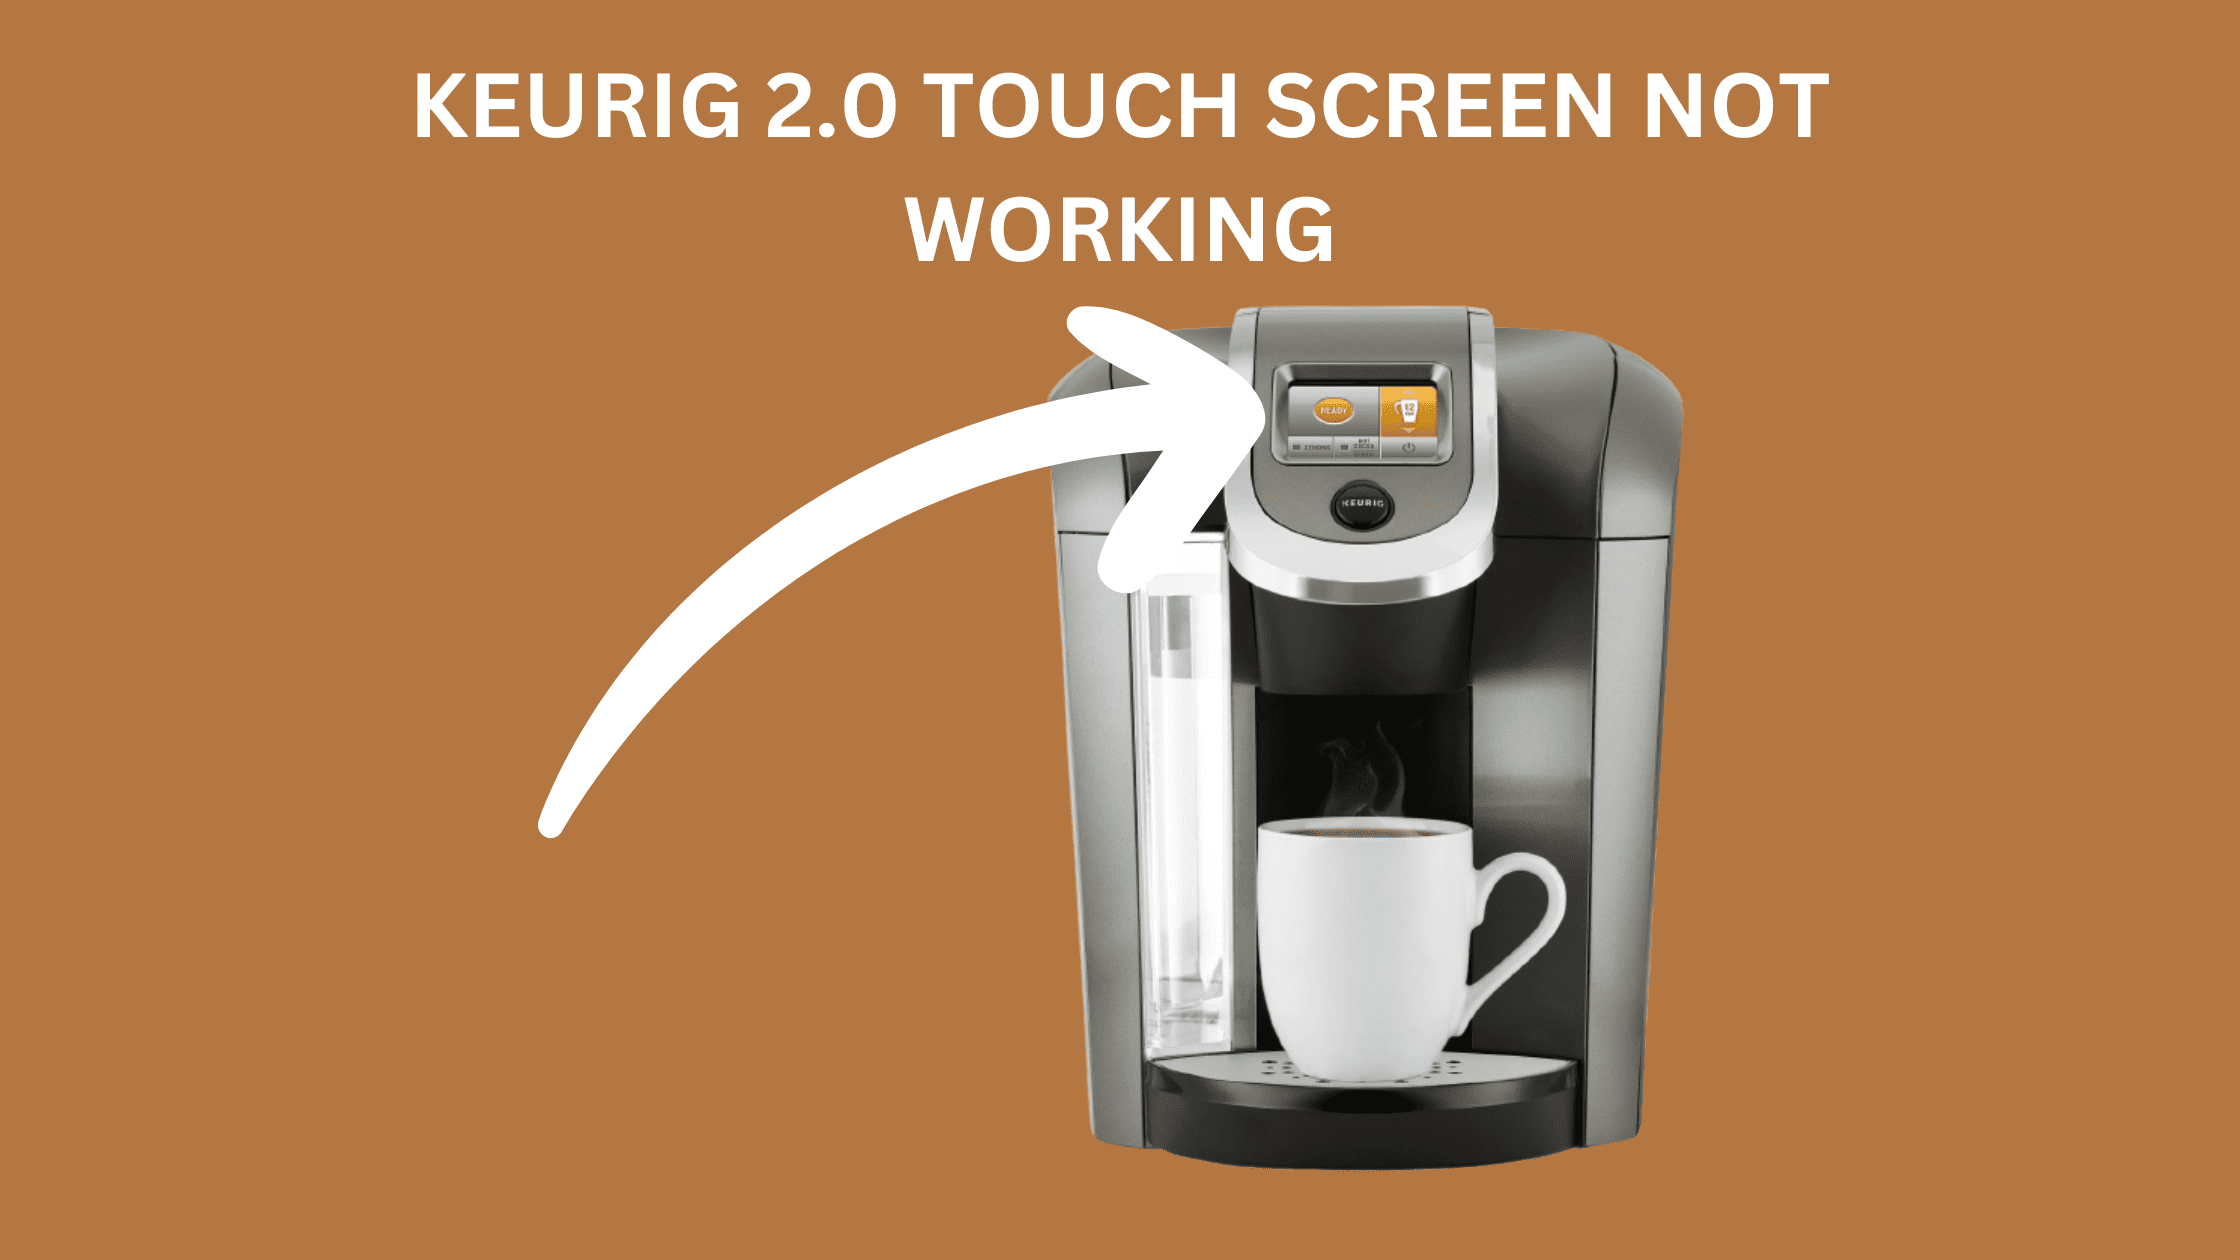 Troubleshooting Guide: Keurig 2.0 Touch Screen Not Working